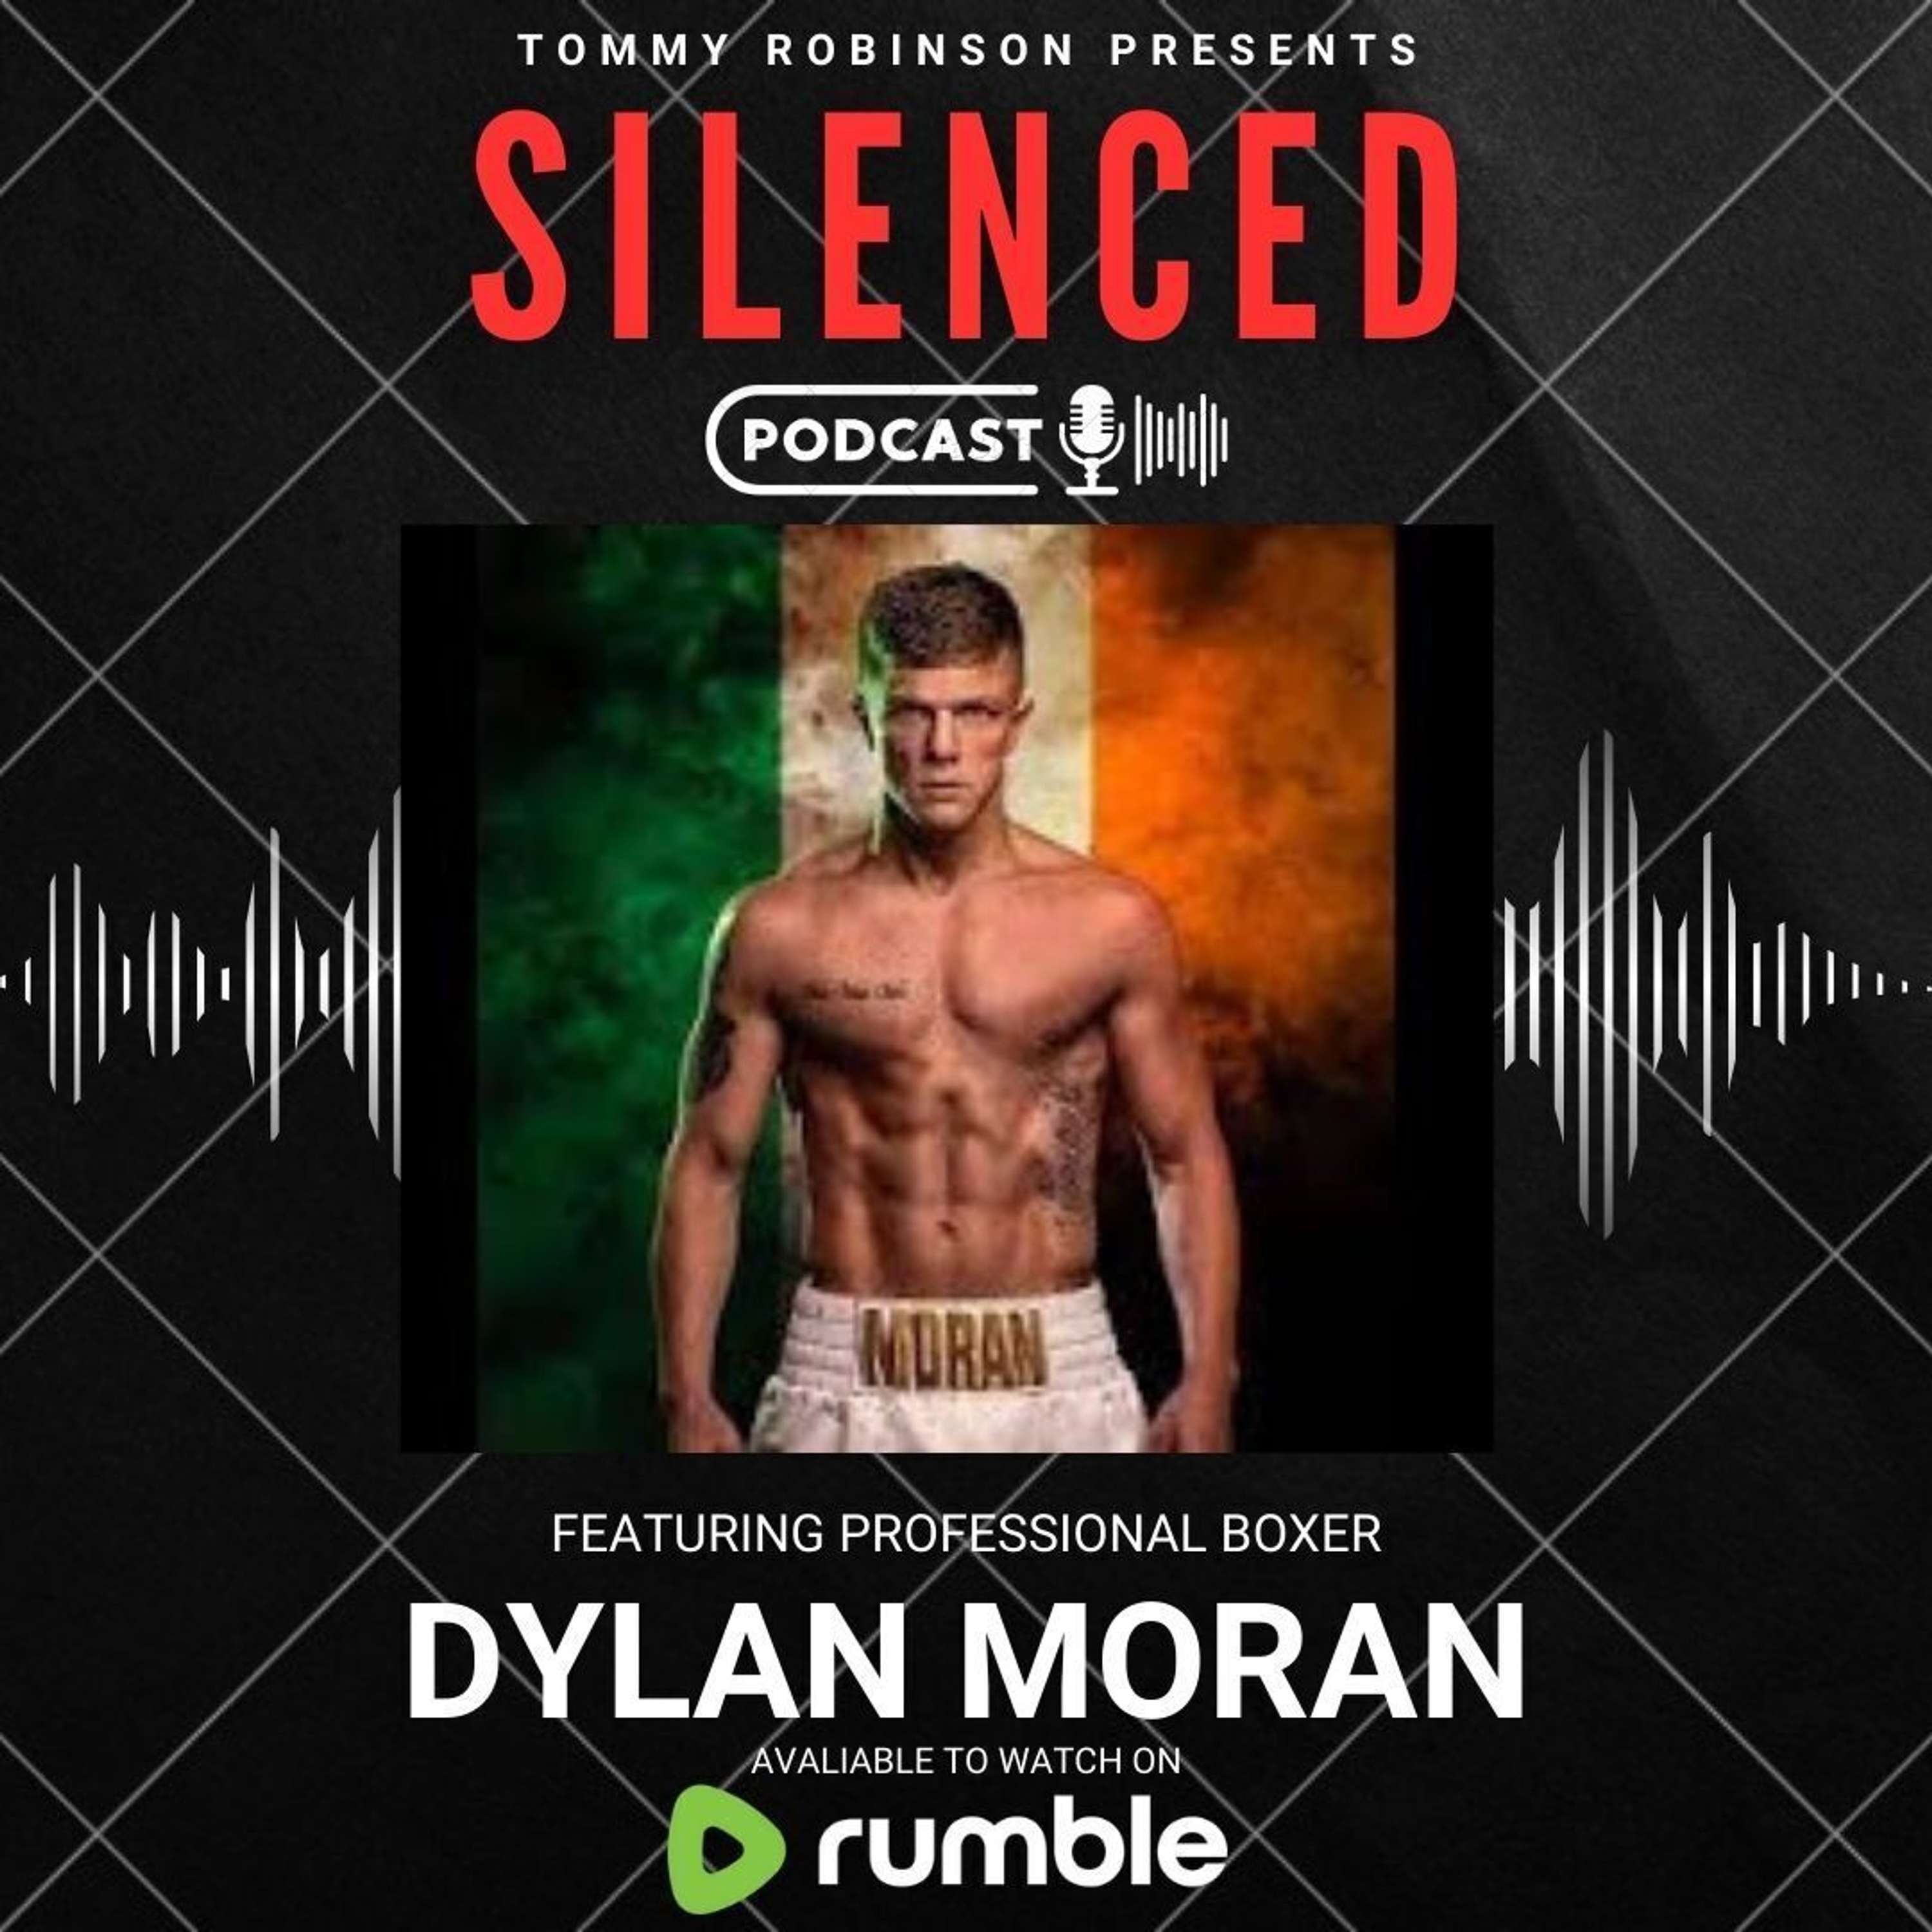 Episode 15 - SILENCED with Tommy Robinson - Dylan Moran